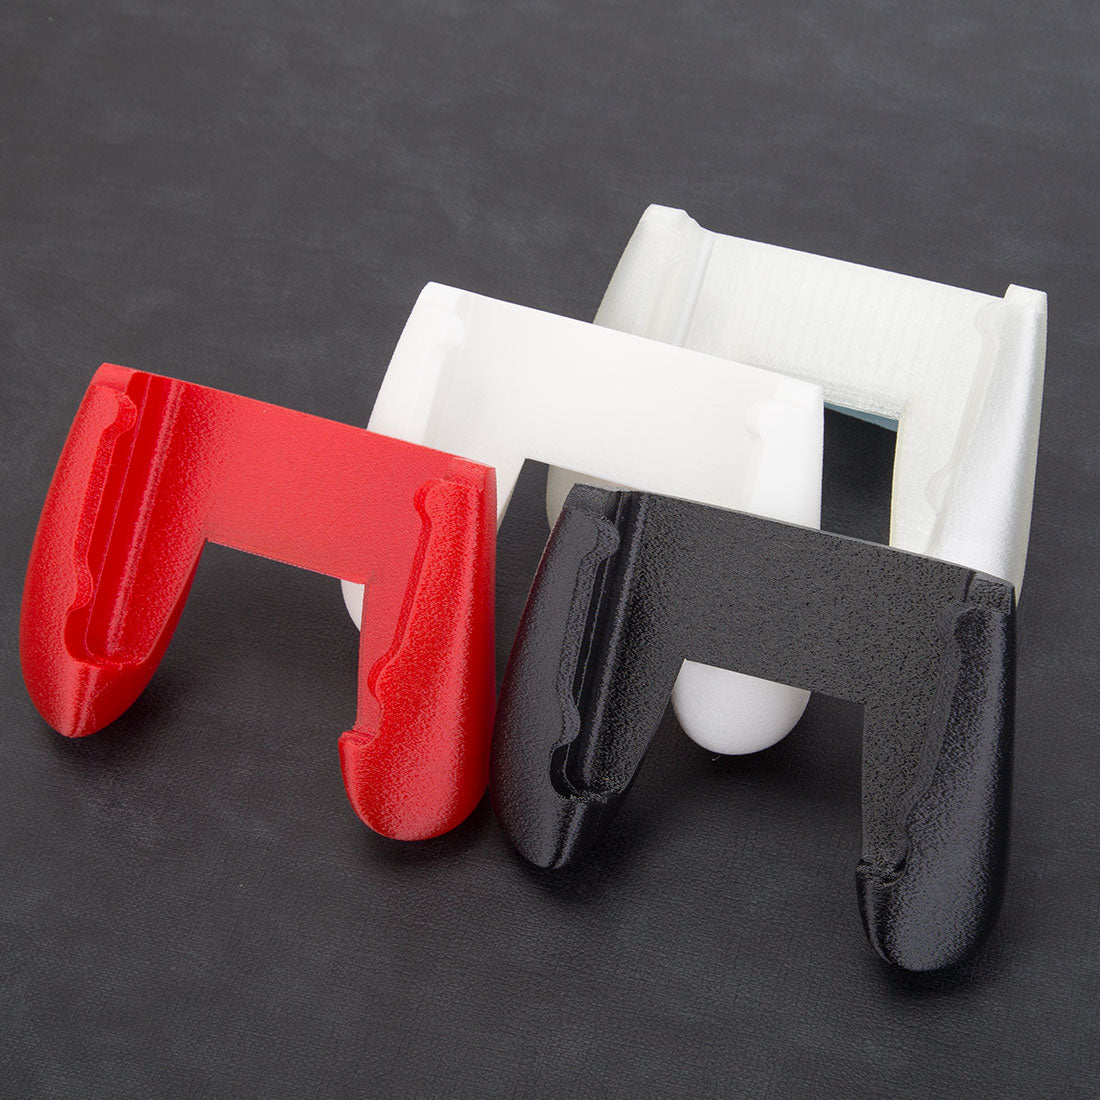 litnxt_3D_printed_flexible_handle_for_analogue_pocket_game_consoles_translucent_06